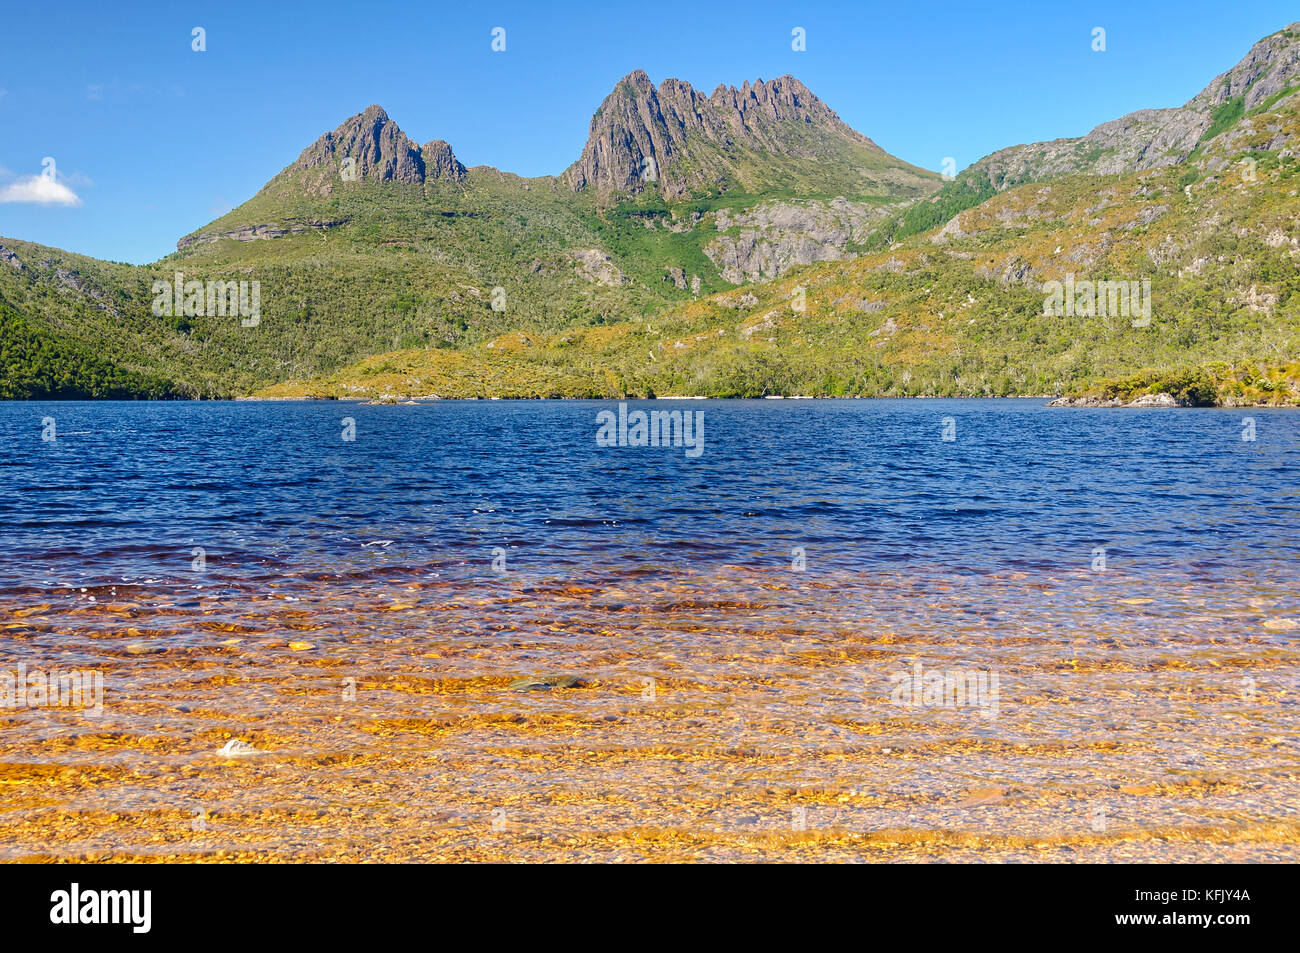 Dove Lake at the northern end of the Cradle Mountain-Lake St Clair National Park is a corrie lake - Tasmania, Australia Stock Photo